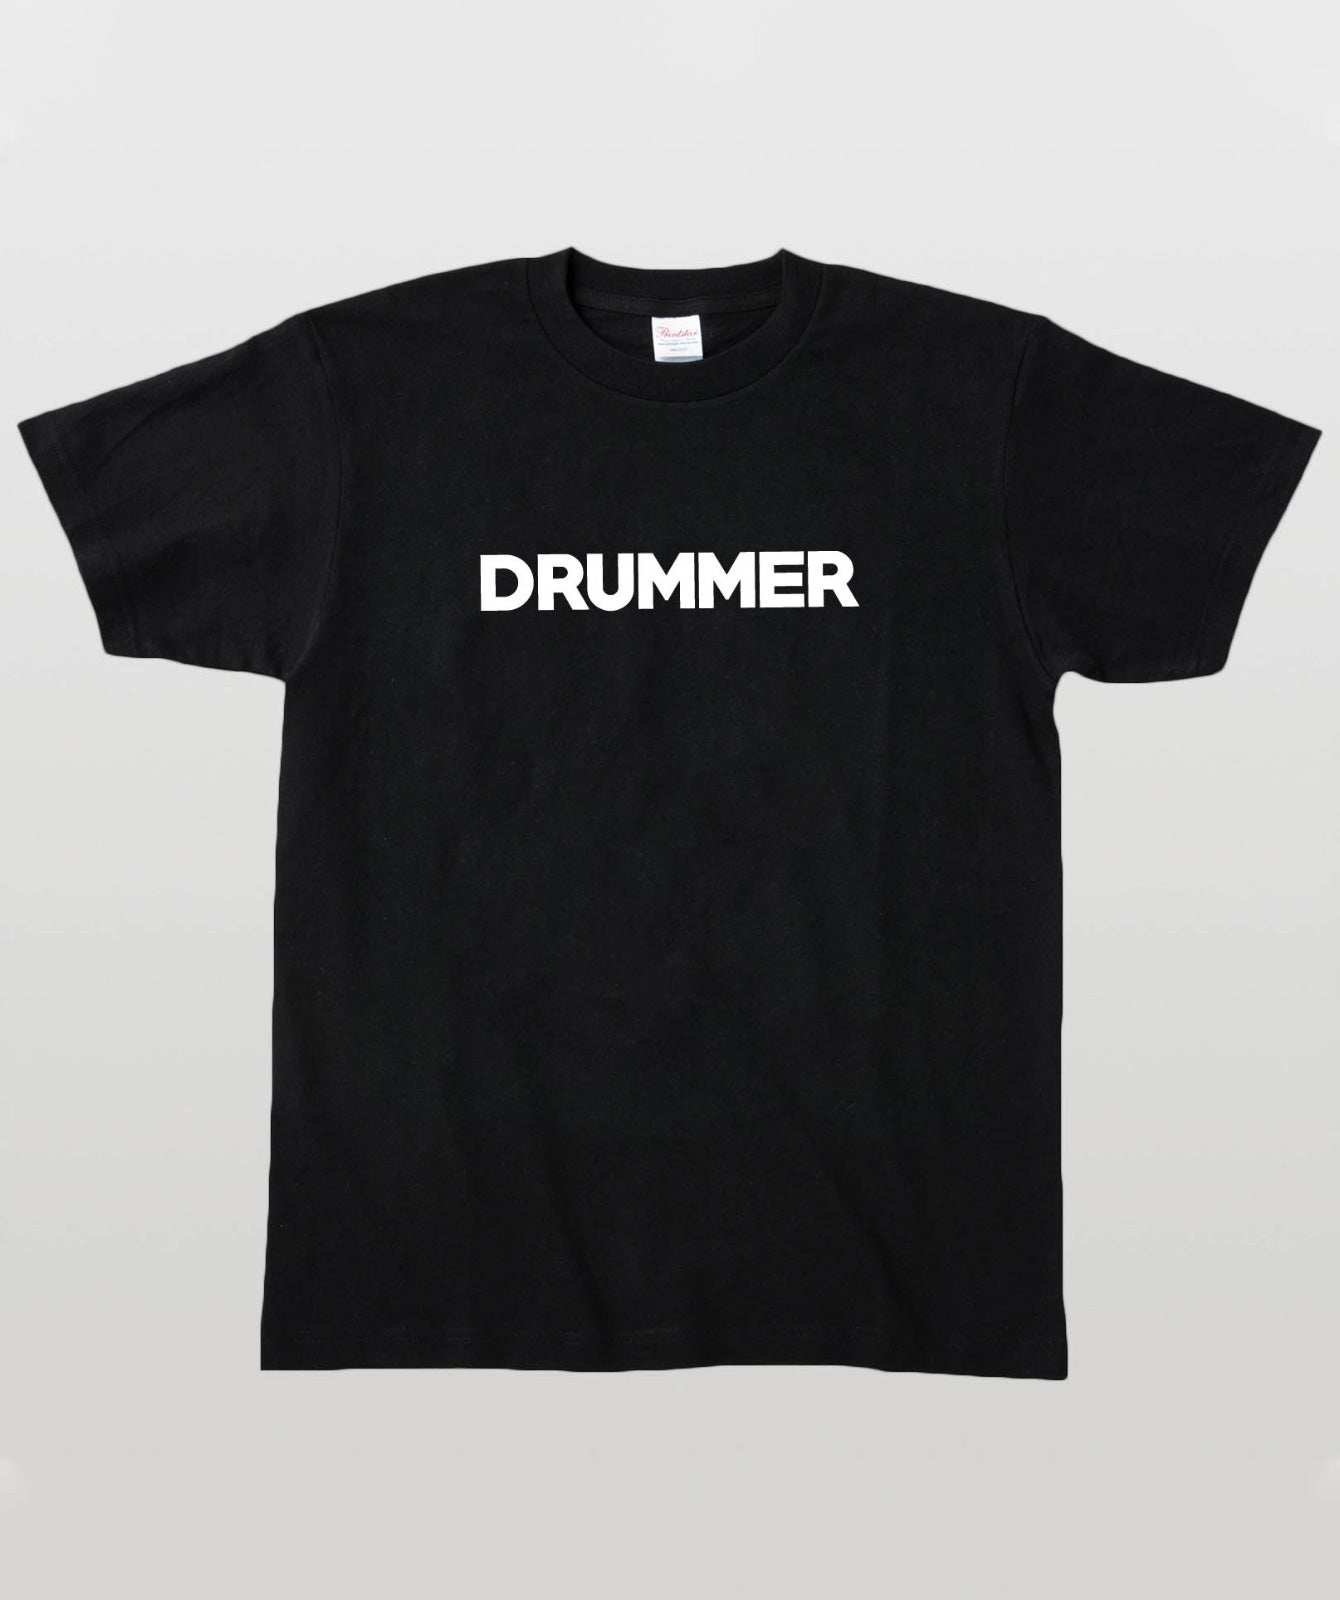 MS PLAYER SERIES ～DRUMMER Type D～